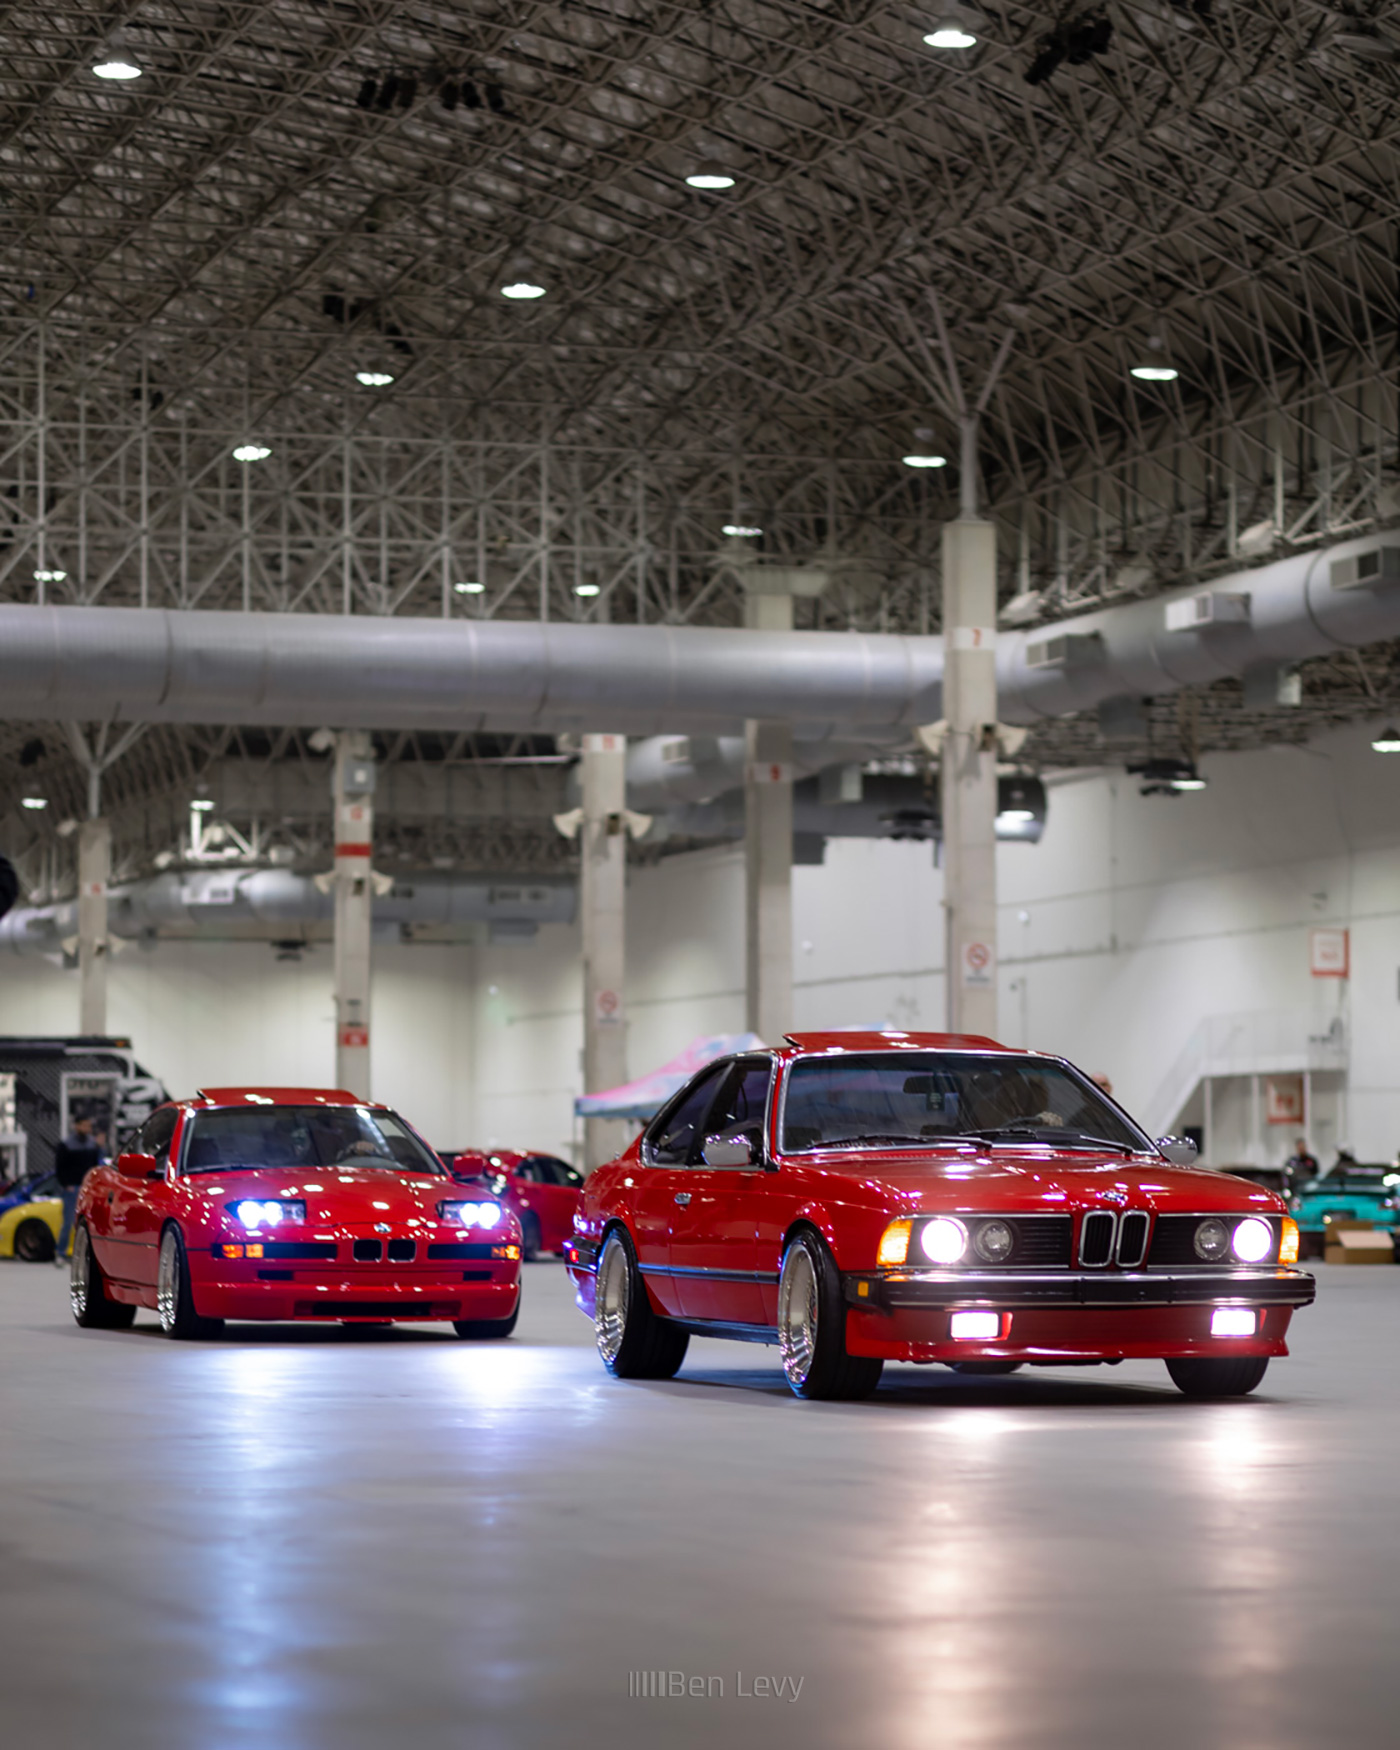 BMW 8 Series and 6 Series leaving Wekfest Chicago